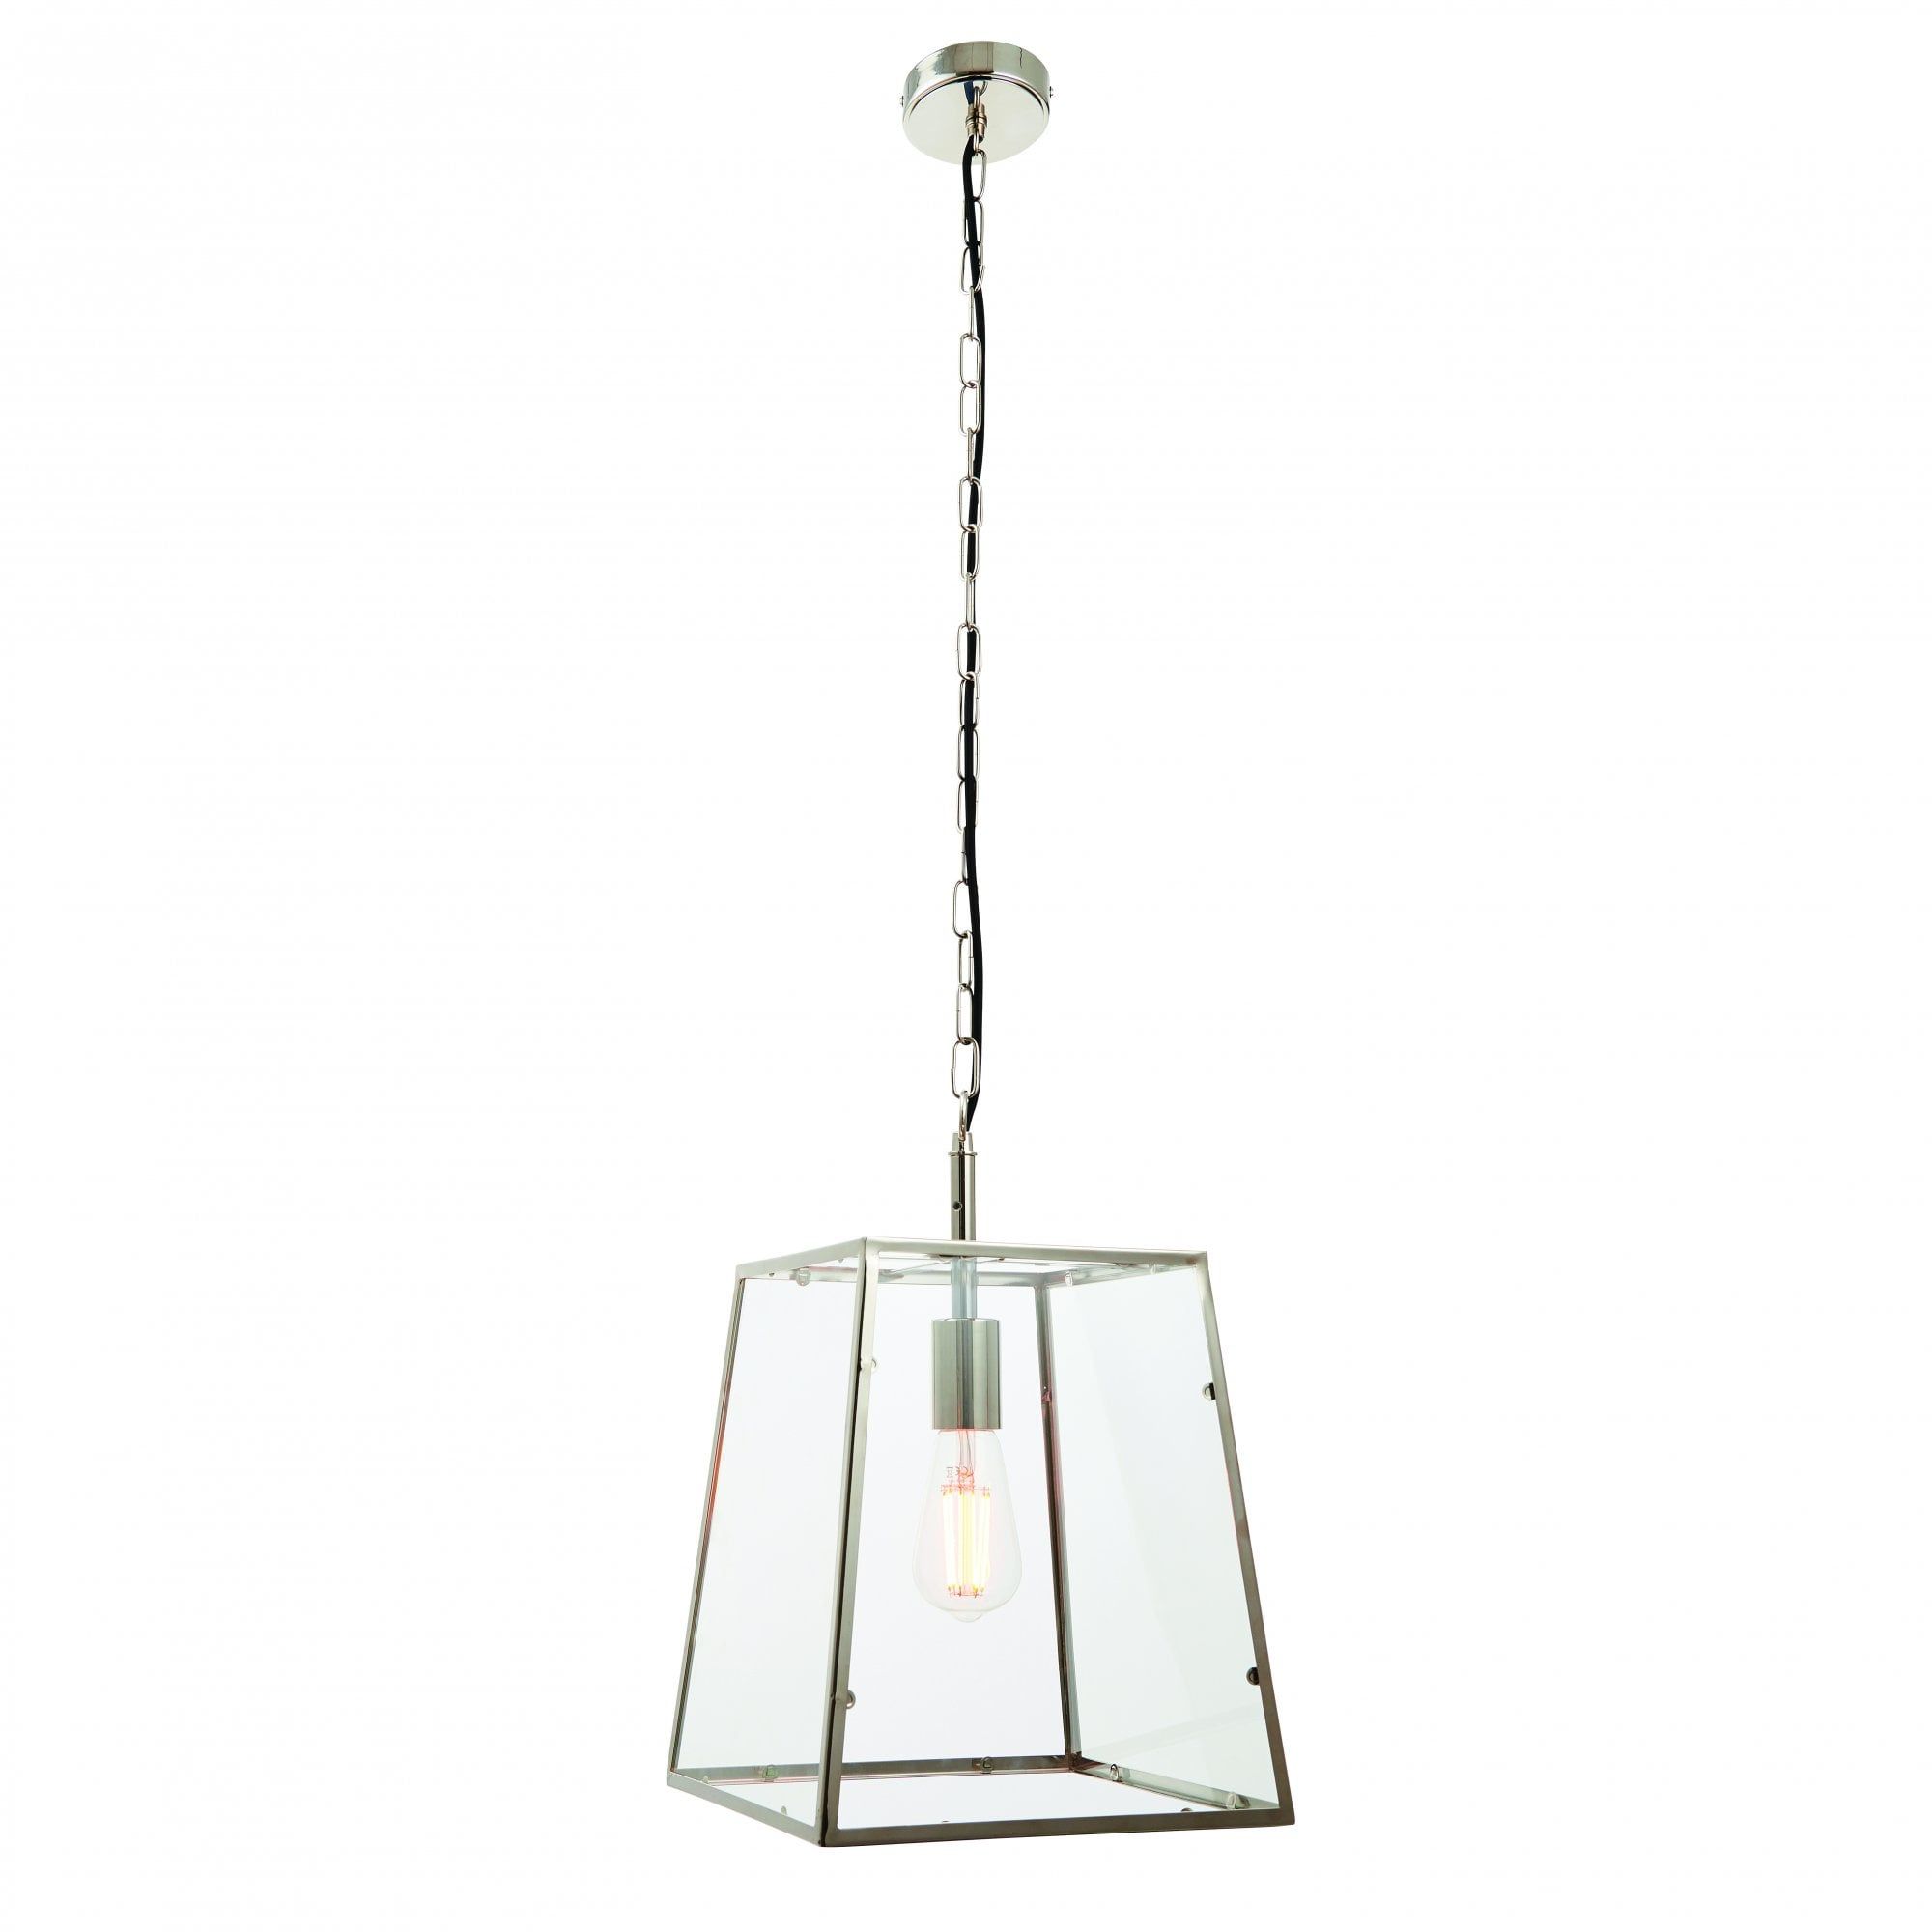 Ceiling Lantern In Polished Nickel With Clear Glass In Lantern Chandeliers With Transparent Glass (View 6 of 15)